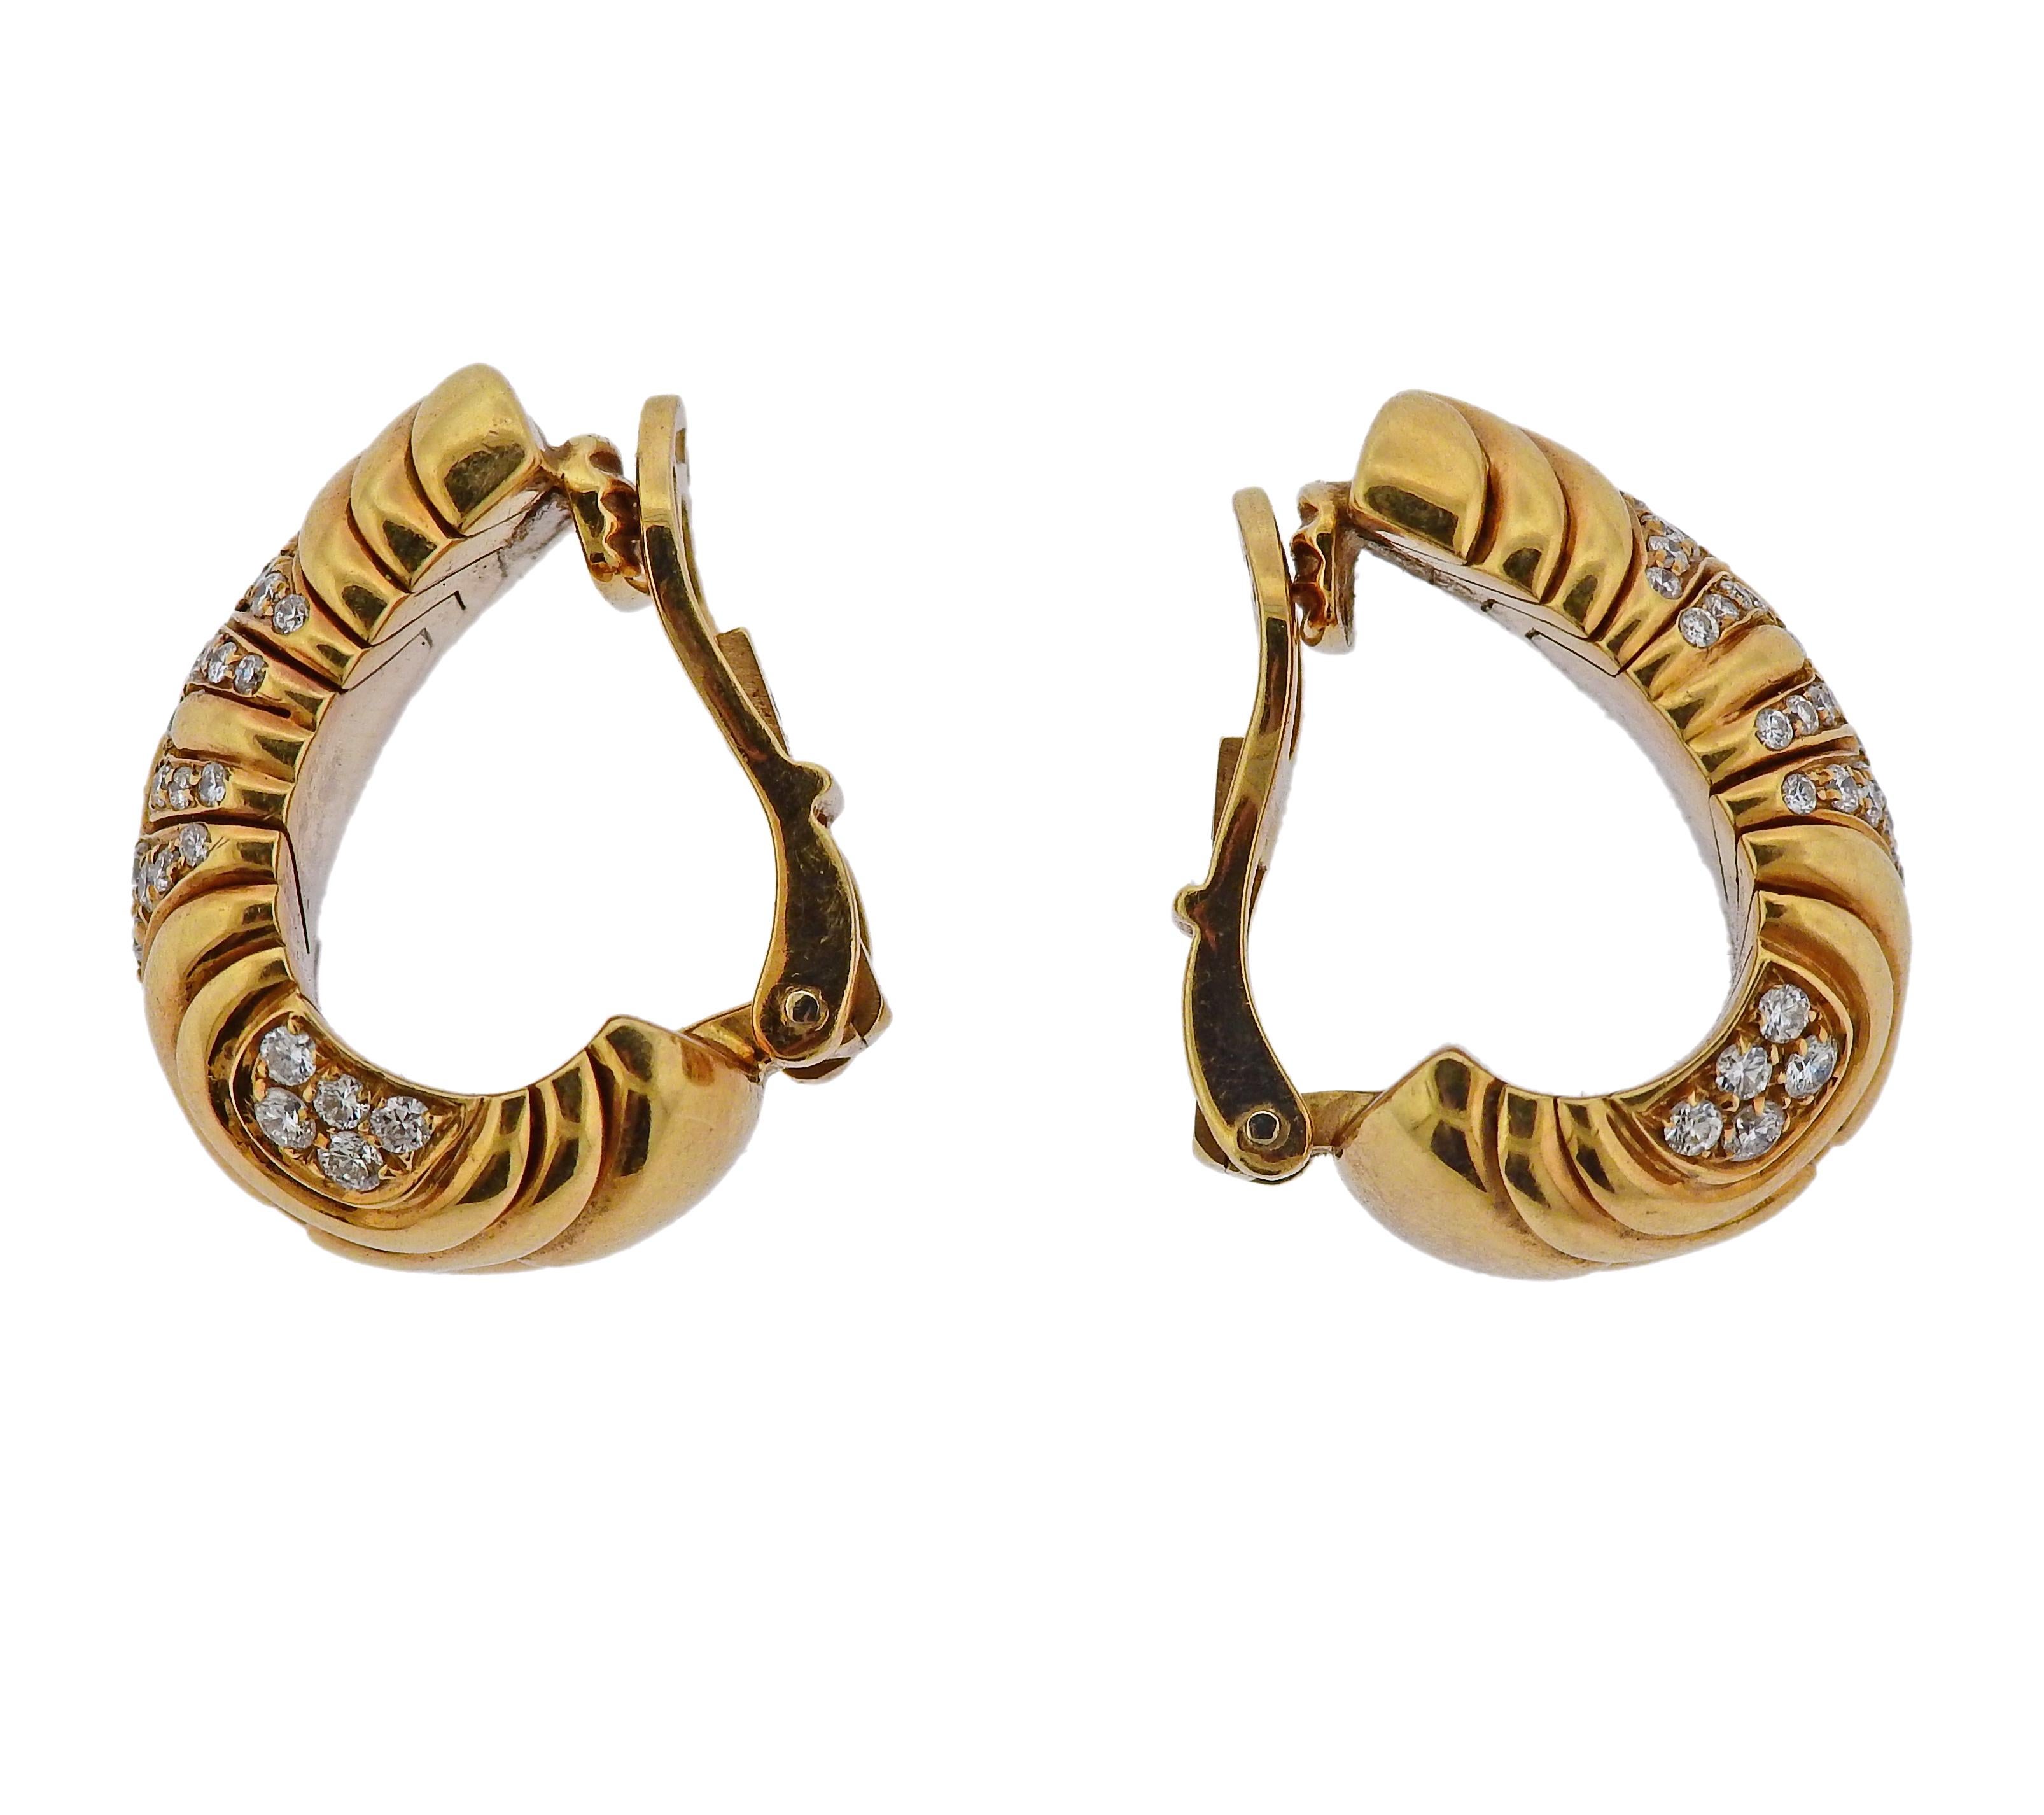 Pair of 18k yellow gold Alveare earrings, set with approx. 1.10ctw in G/VS diamonds.  Earrings are 23mm x 14mm. Weigh 34.2 grams. Marked: BA6314, Bvlgari, 1988, 750.